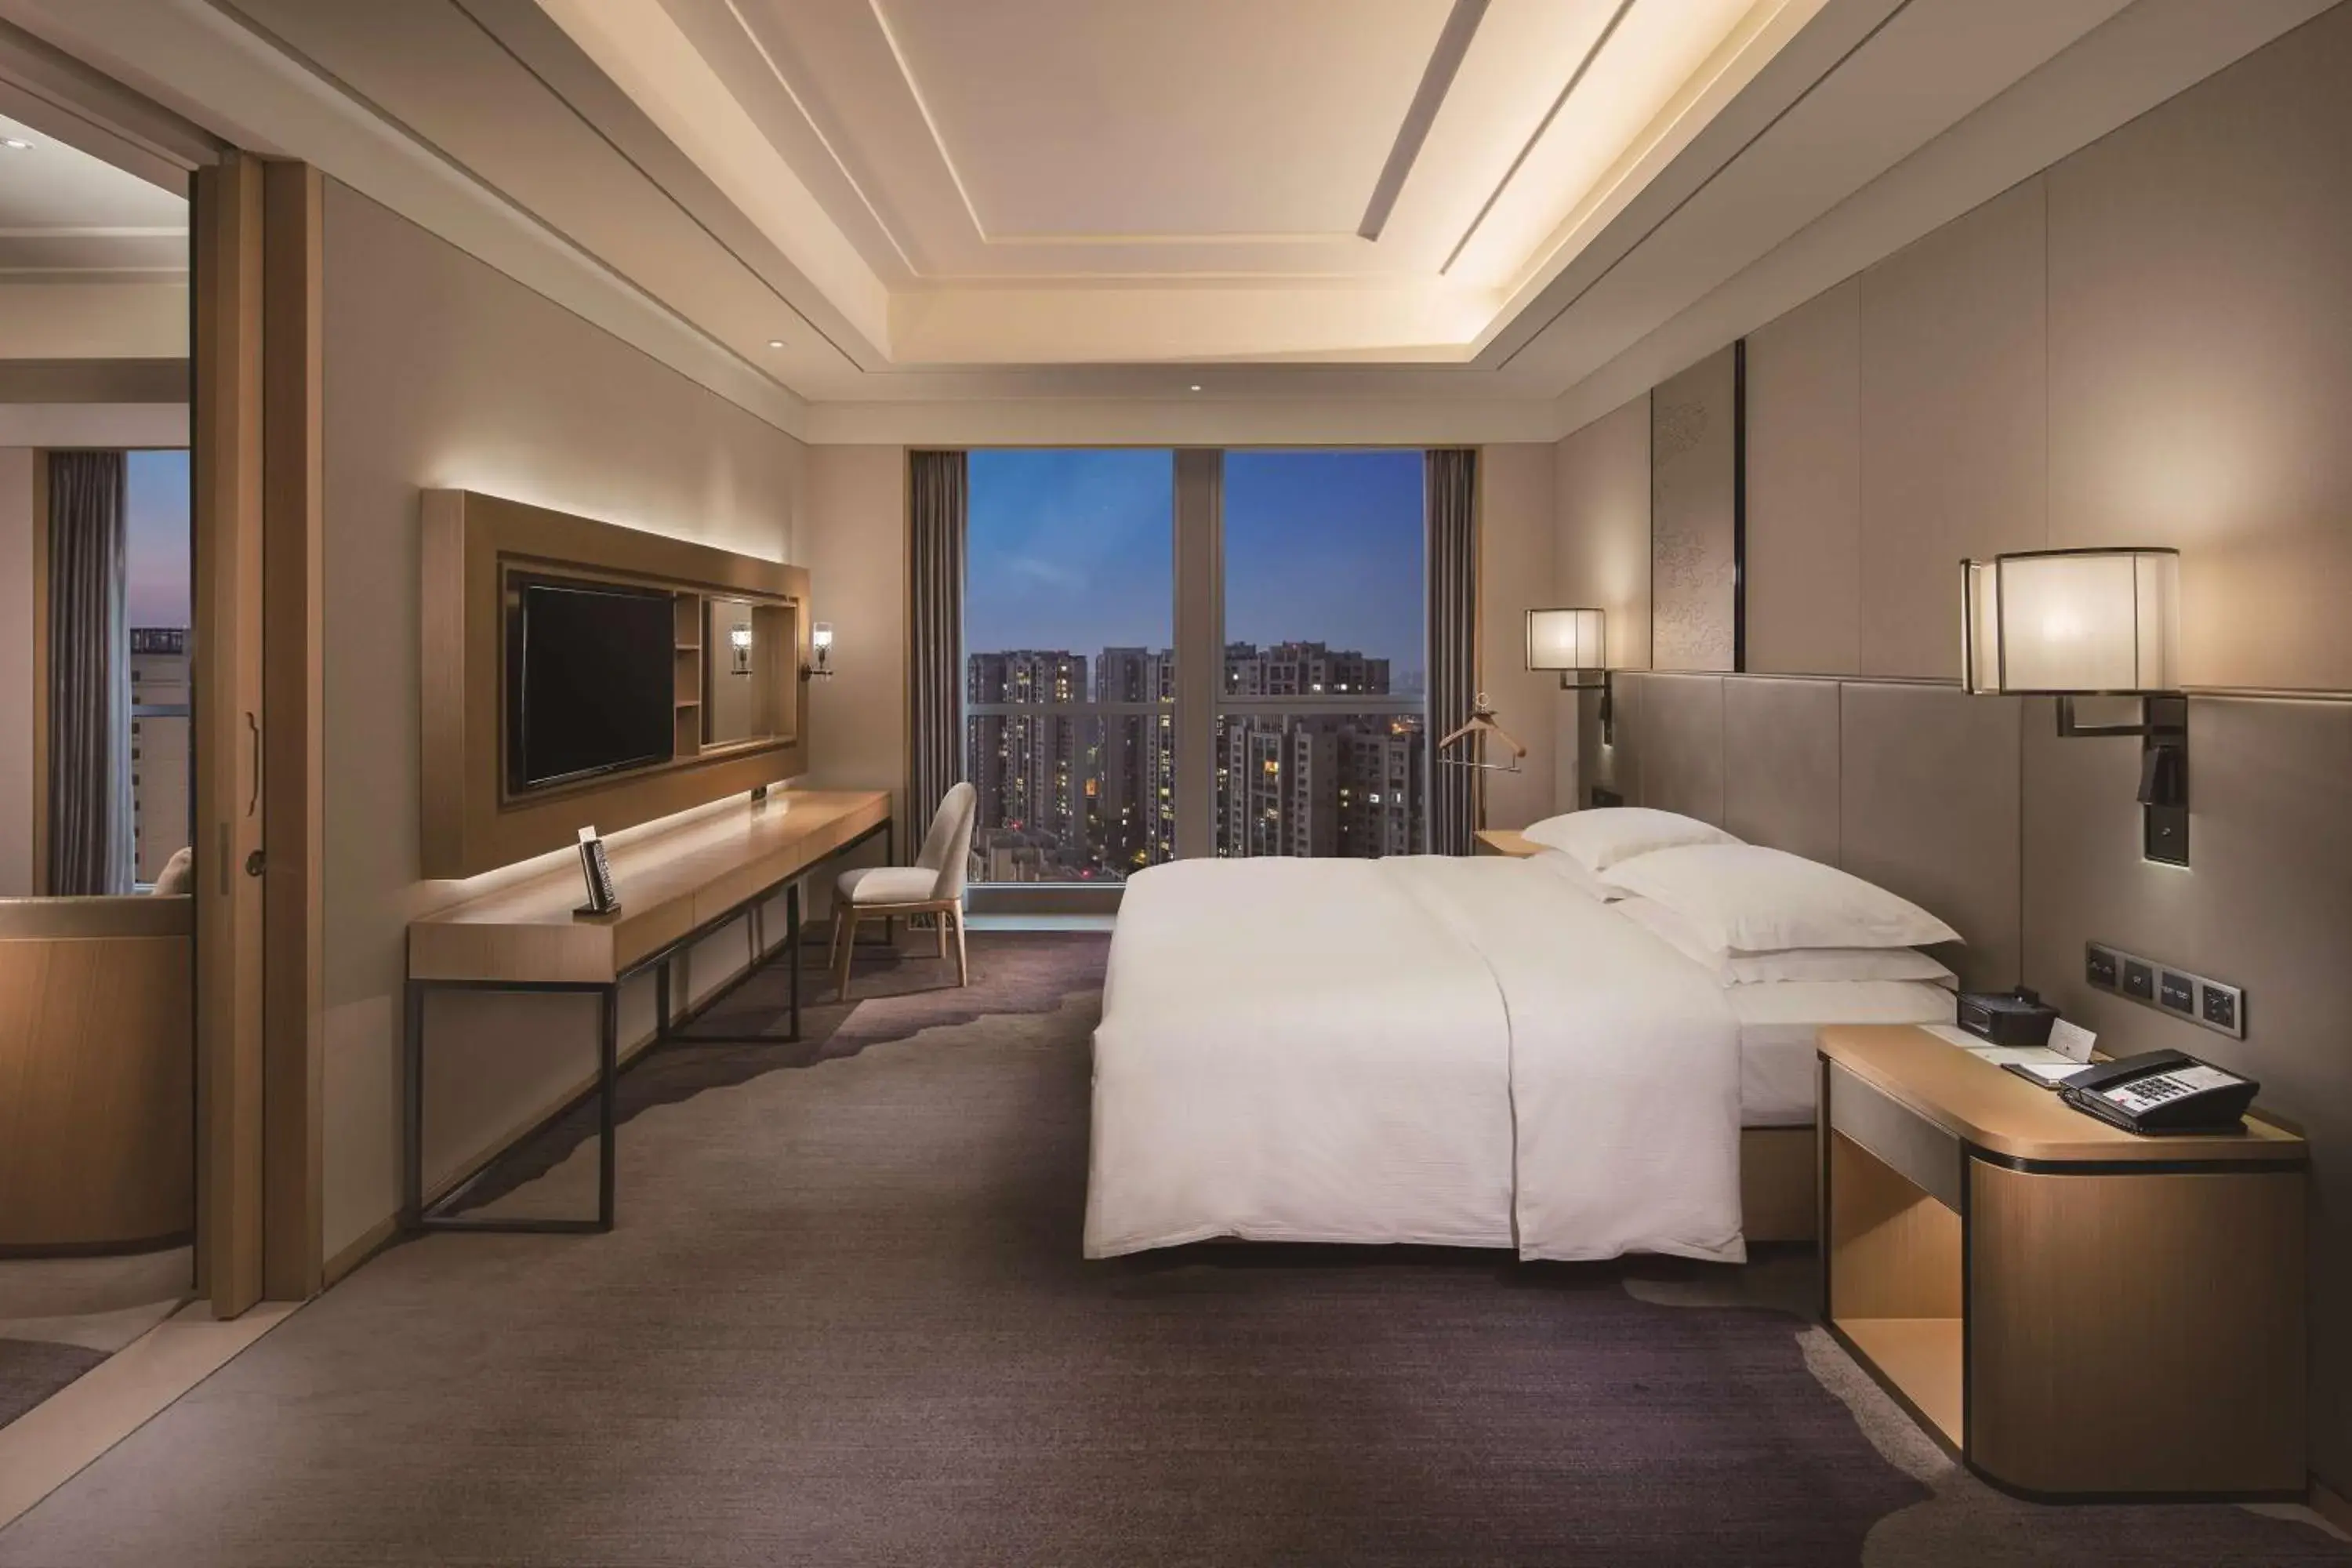 Bedroom in DoubleTree by Hilton Chengdu Longquanyi